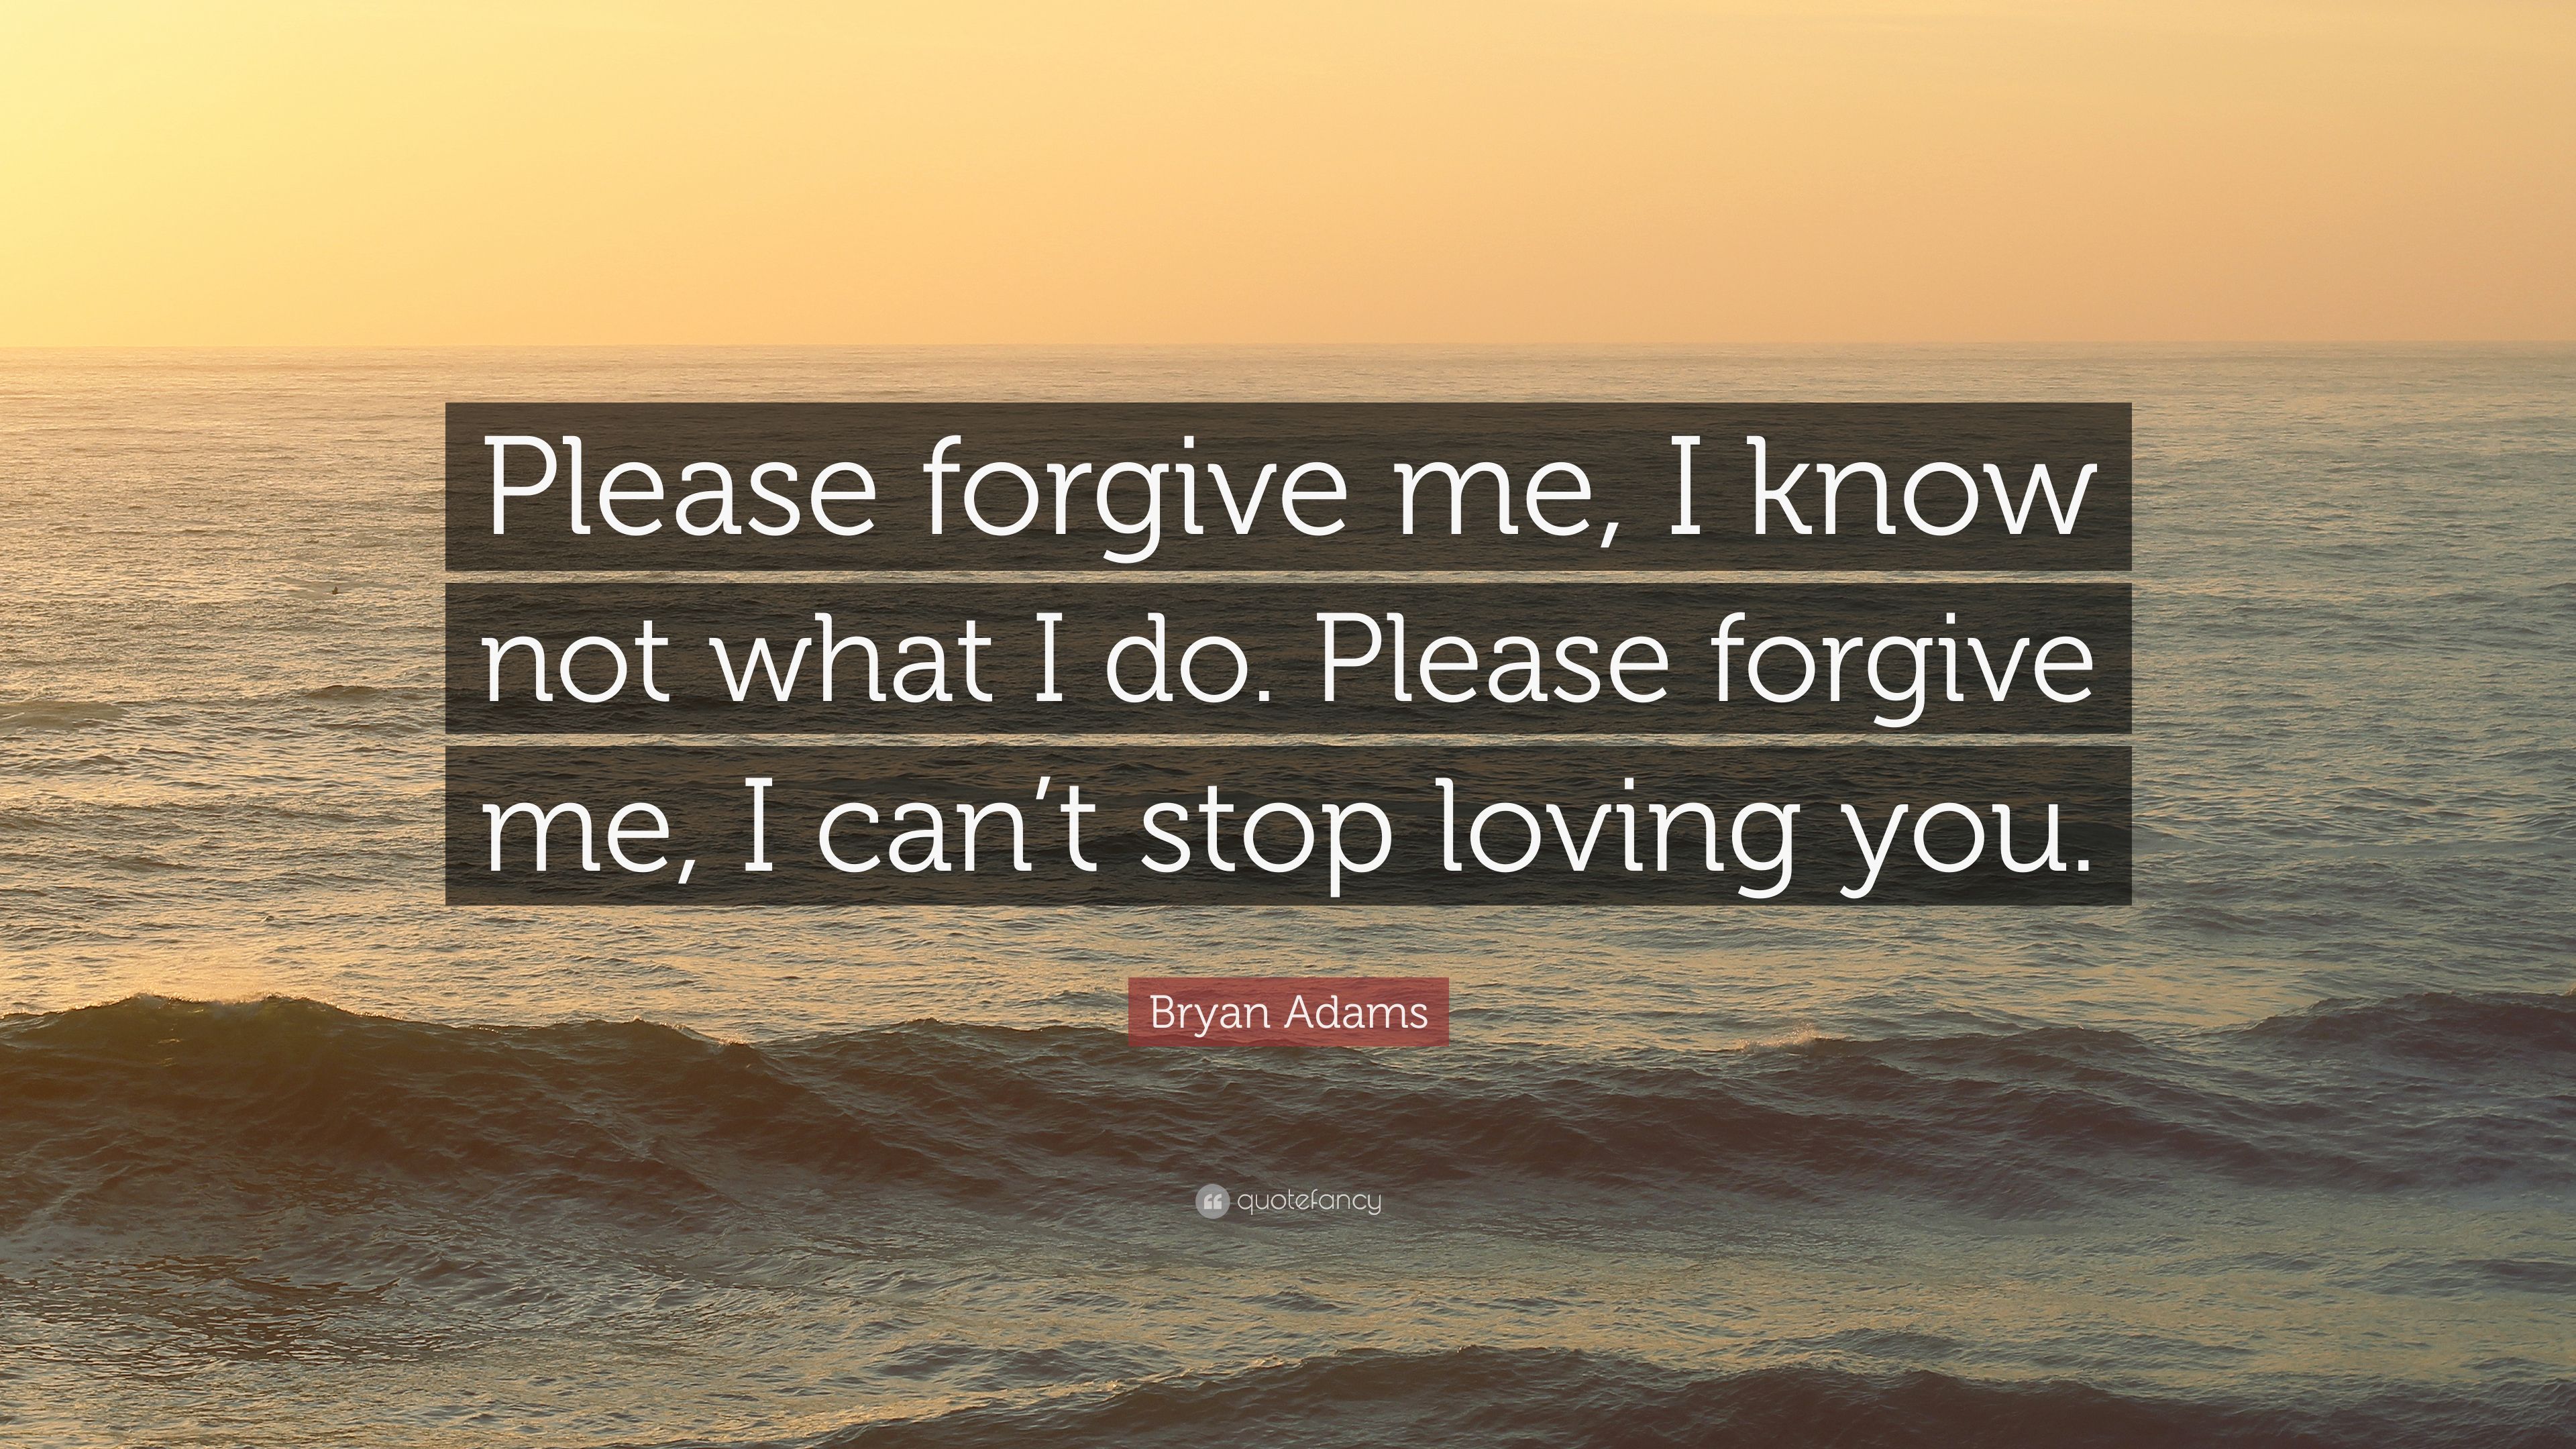 Bryan Adams Quote: “Please forgive me, I know not what I do